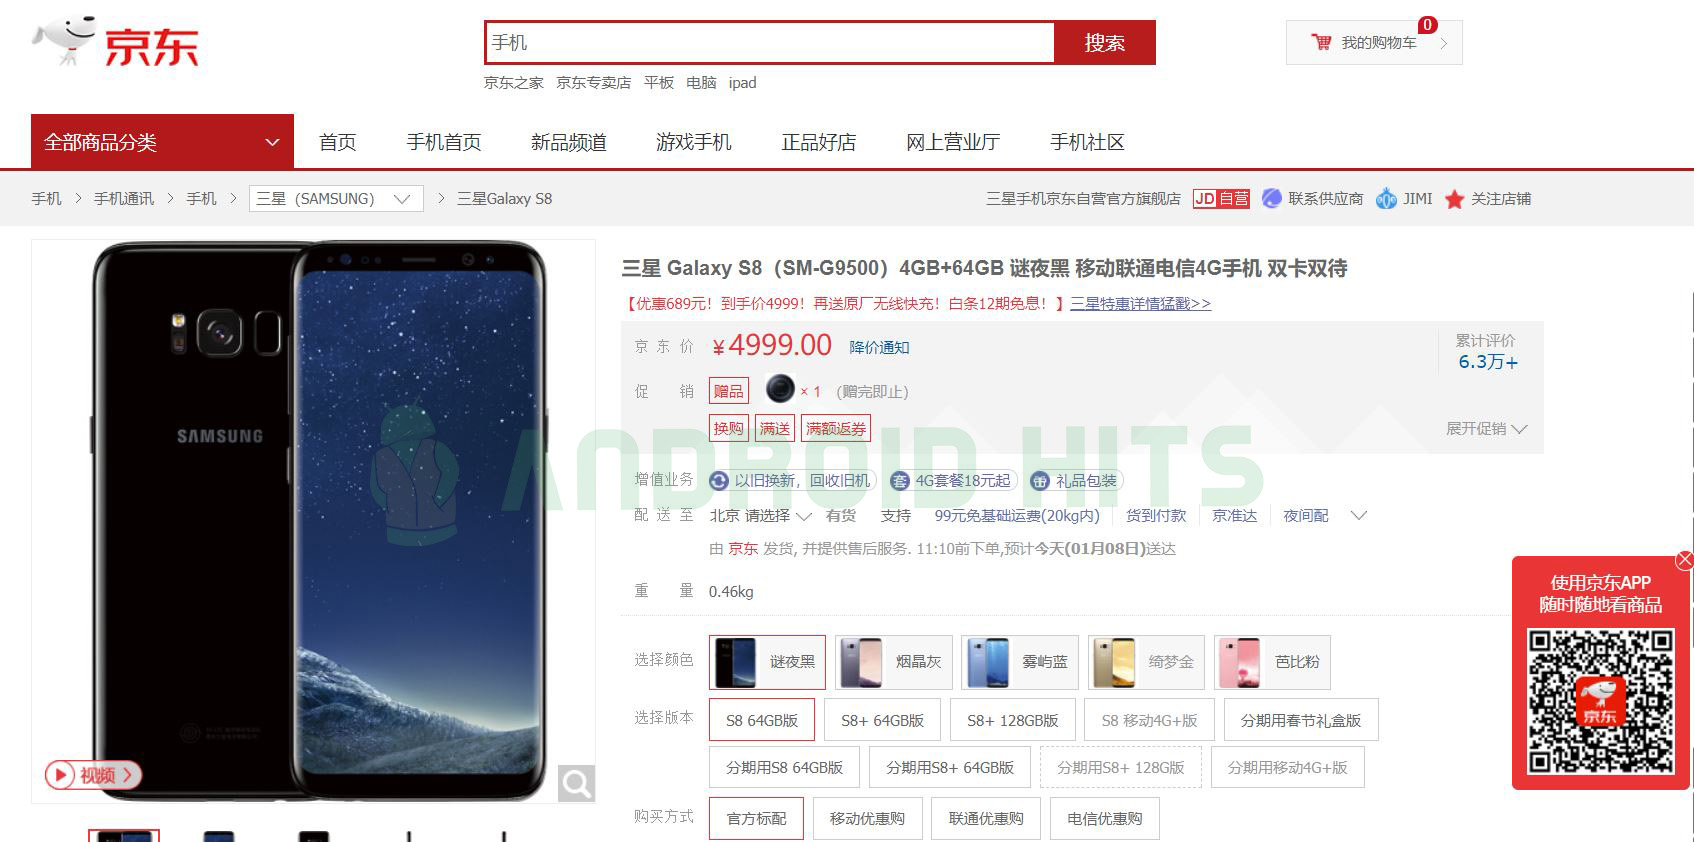 Deal Alert: Samsung Galaxy S8 and S8+ get price slash in China 2